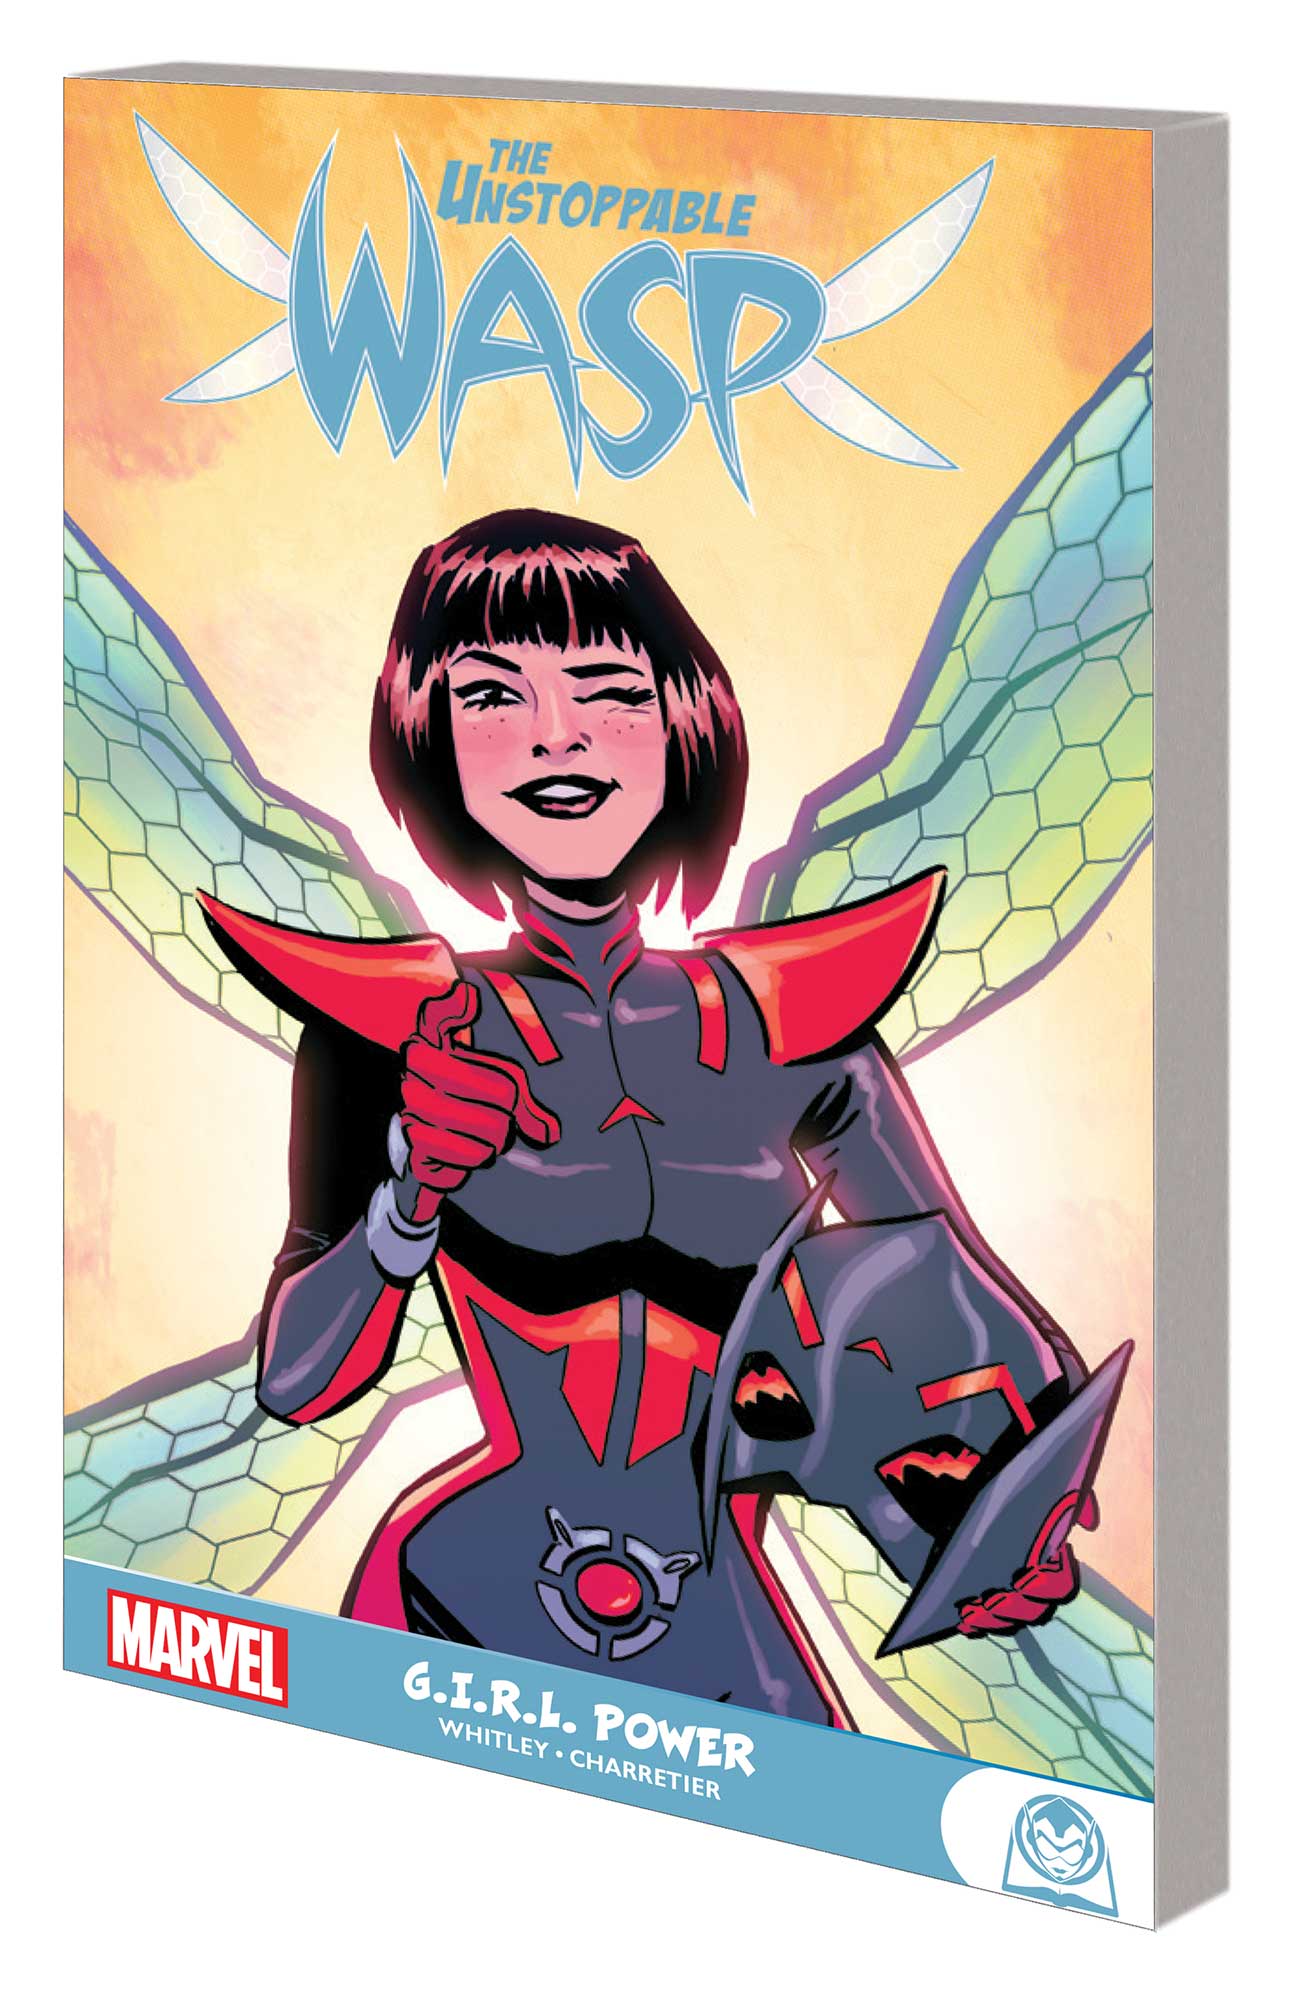 The Unstoppable Wasp: G. I. R. L Power